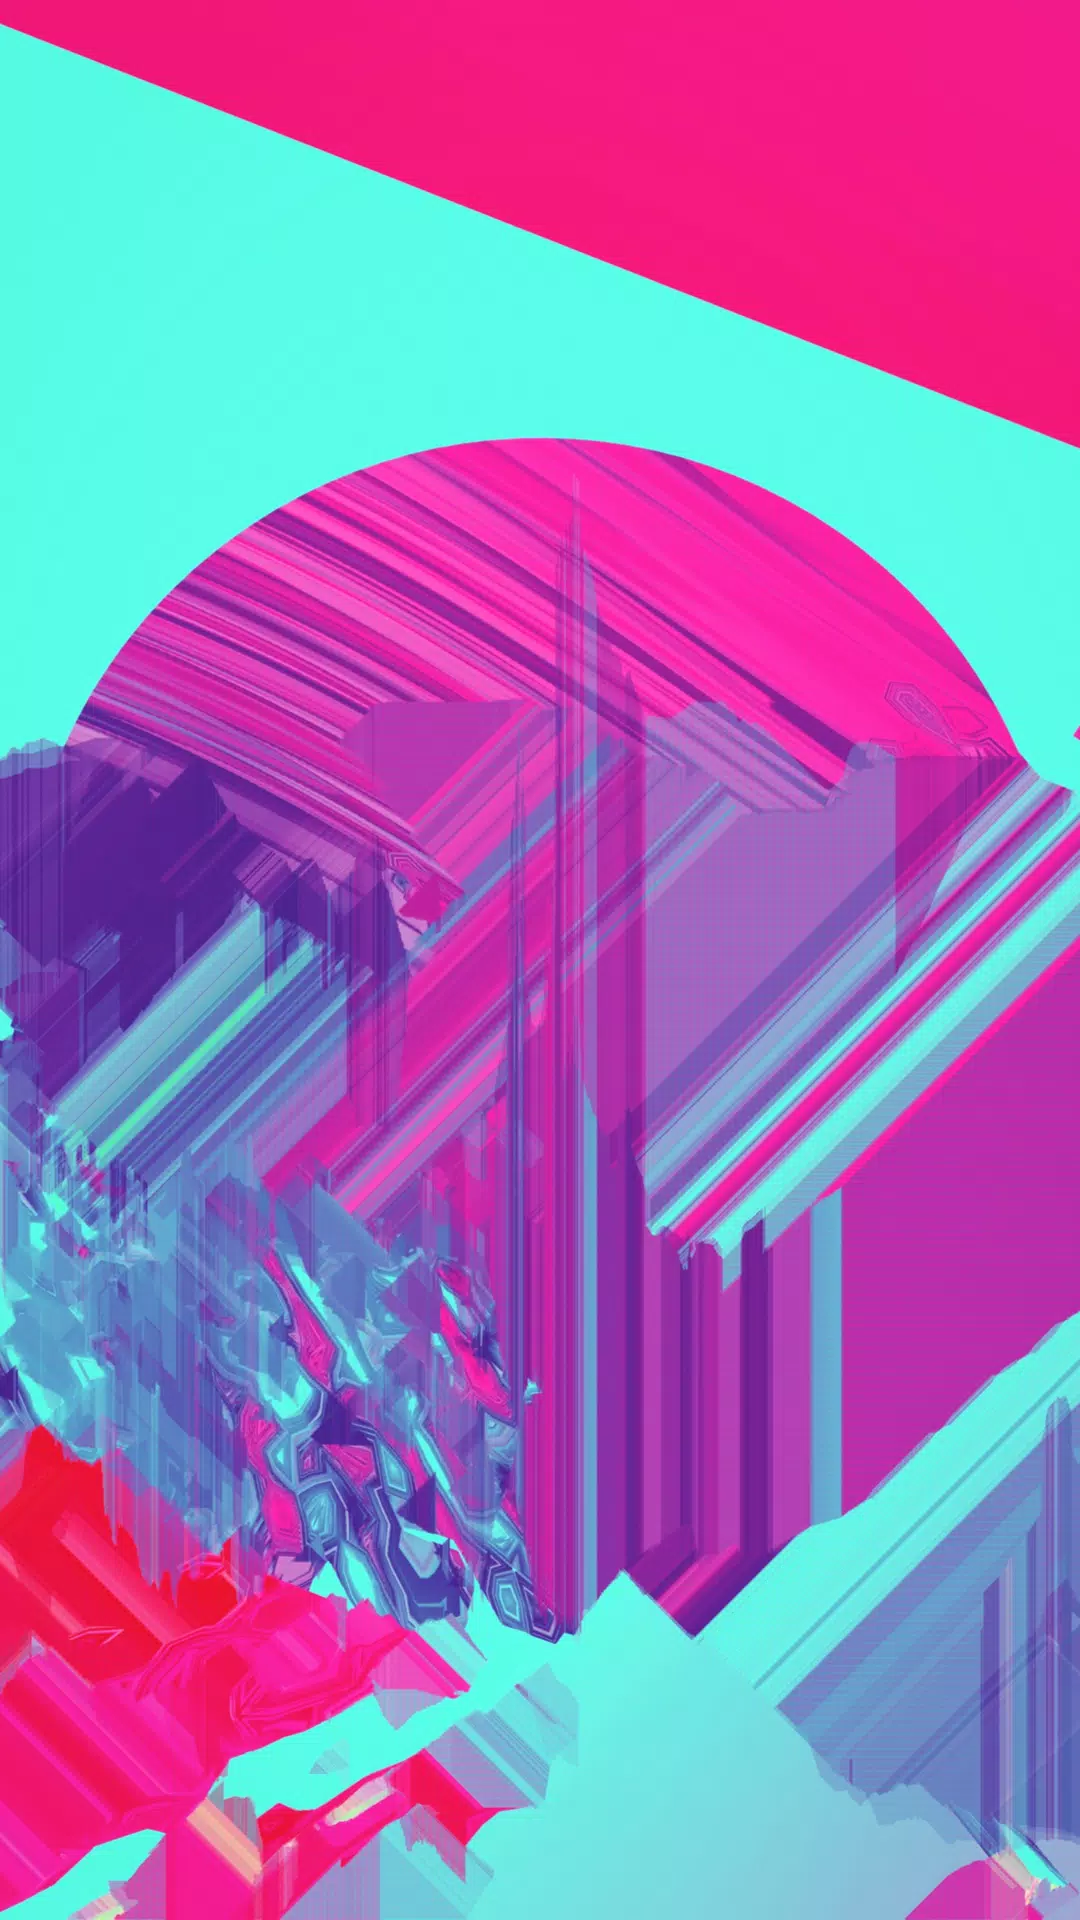 A pink and blue abstract image with a circular shape - VHS